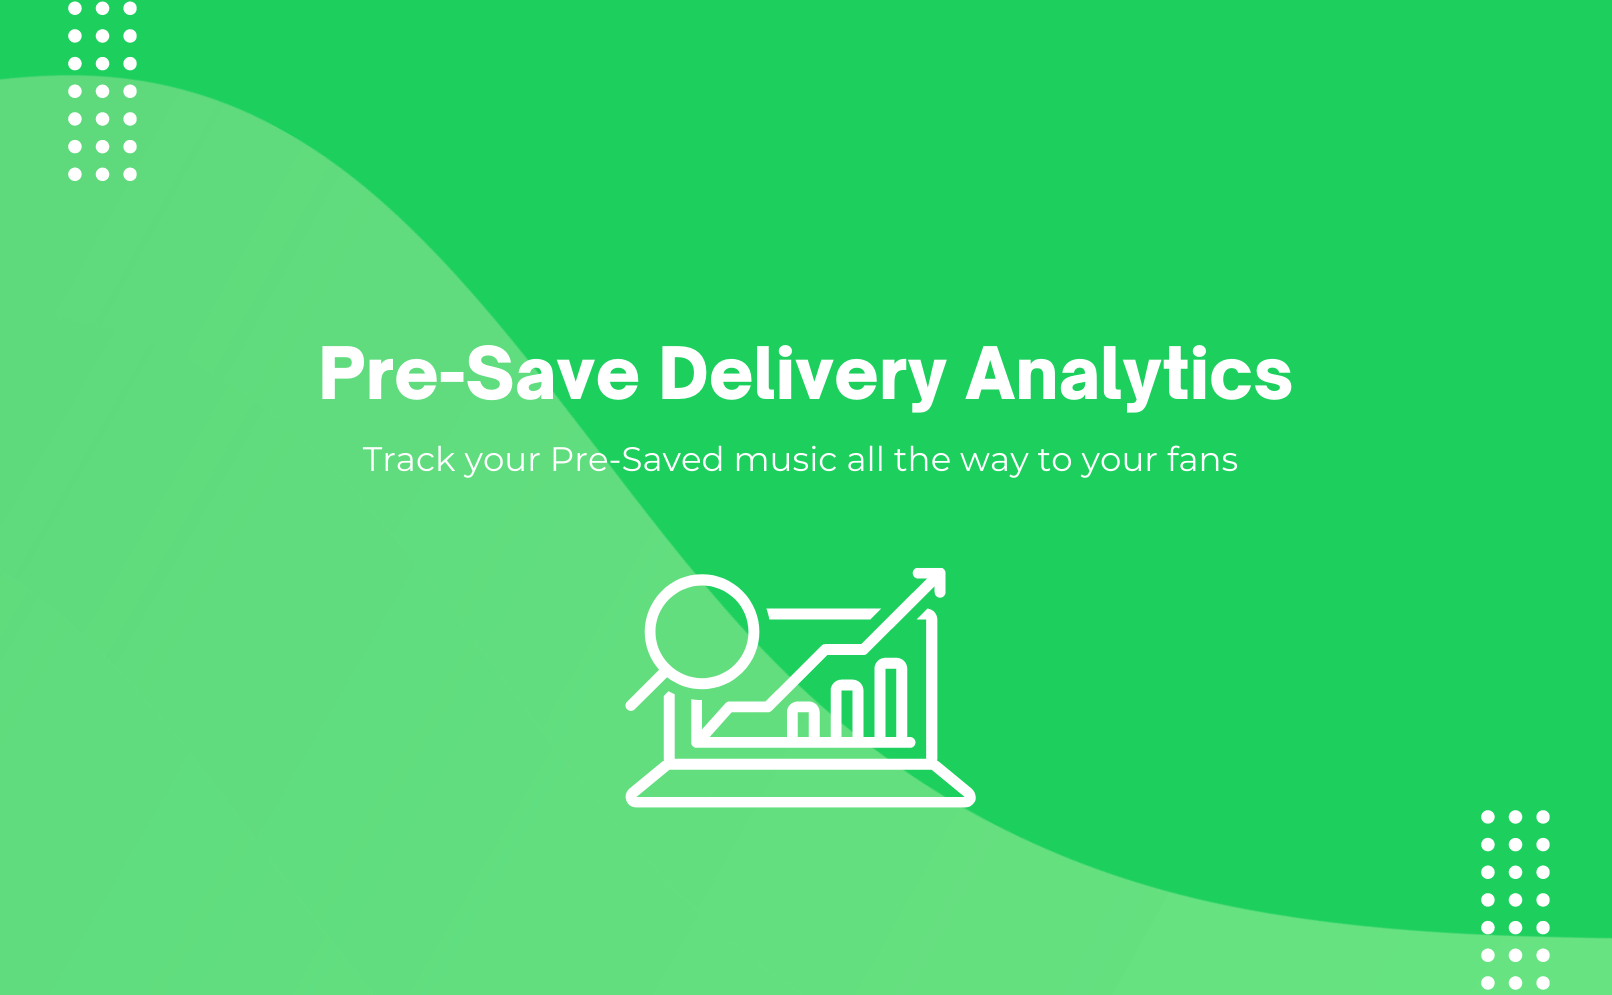 Pre-Save Delivery Analytics - Track your Pre-Saved Music all the way to your fans